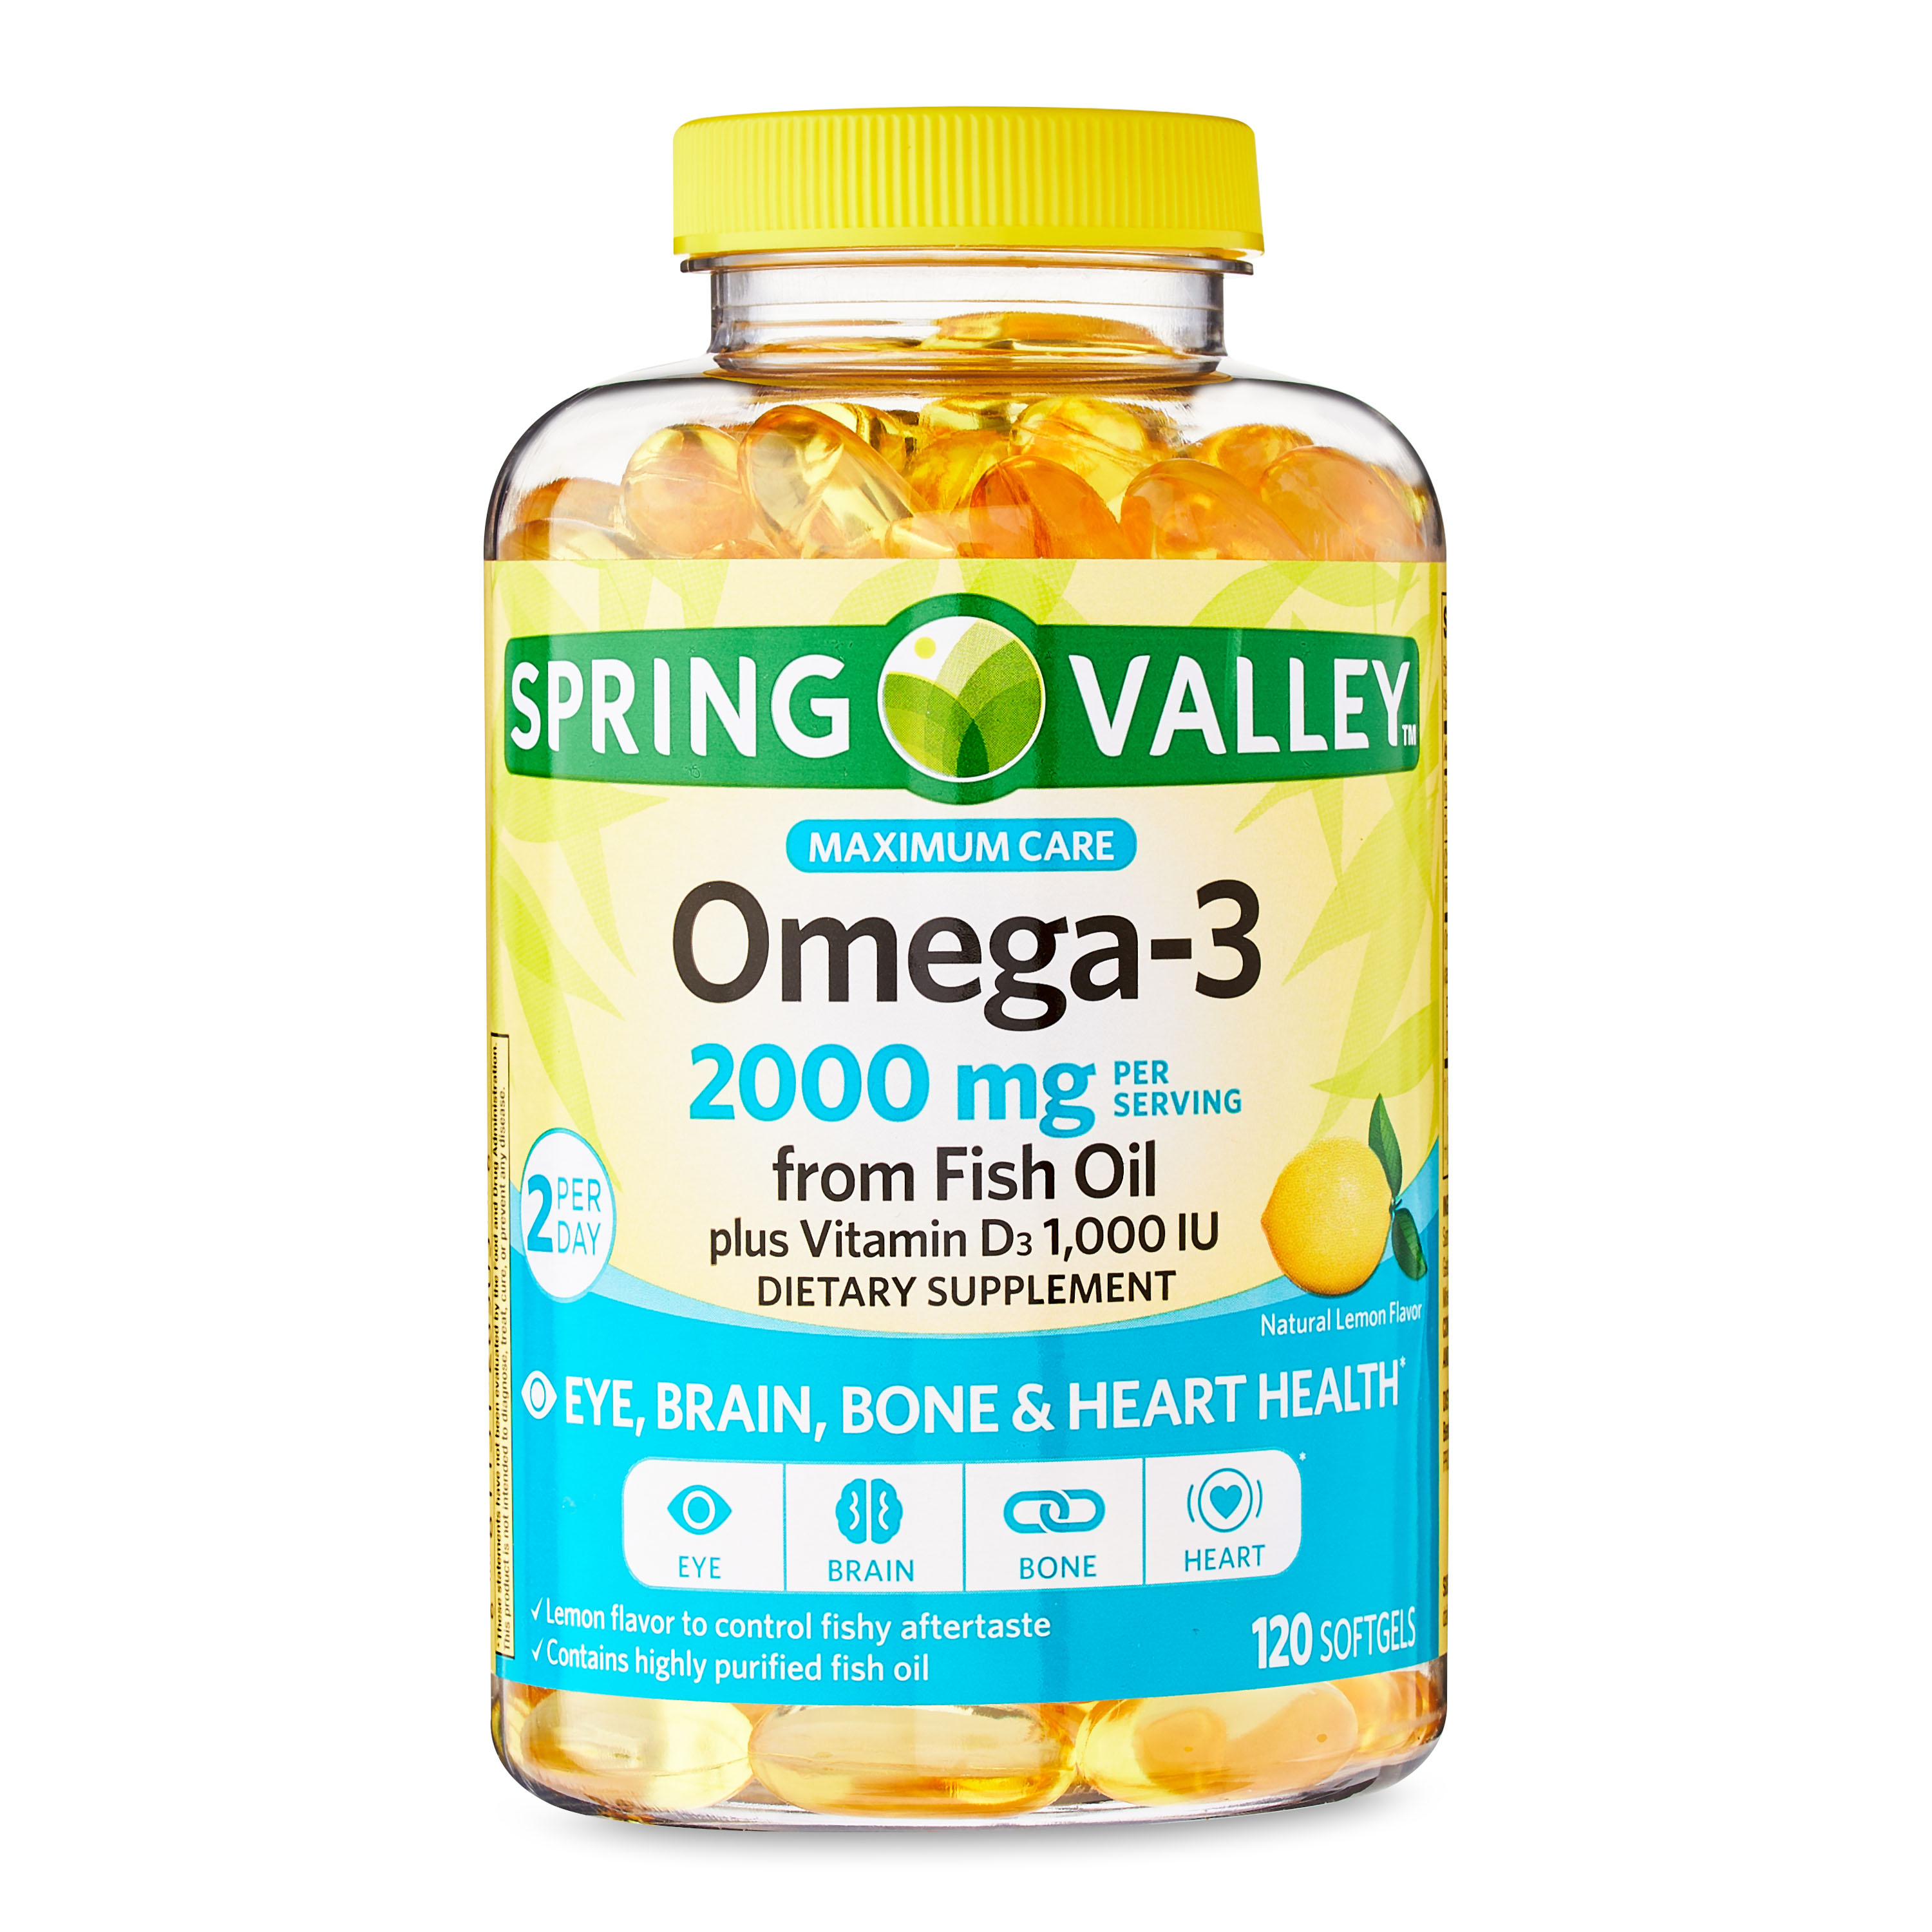 Spring Valley Maximum Care Omega-3 from Fish Oil Eye Brain Bone & Heart Health Dietary Supplement Softgels, 2000 mg, 120 Count - image 1 of 9